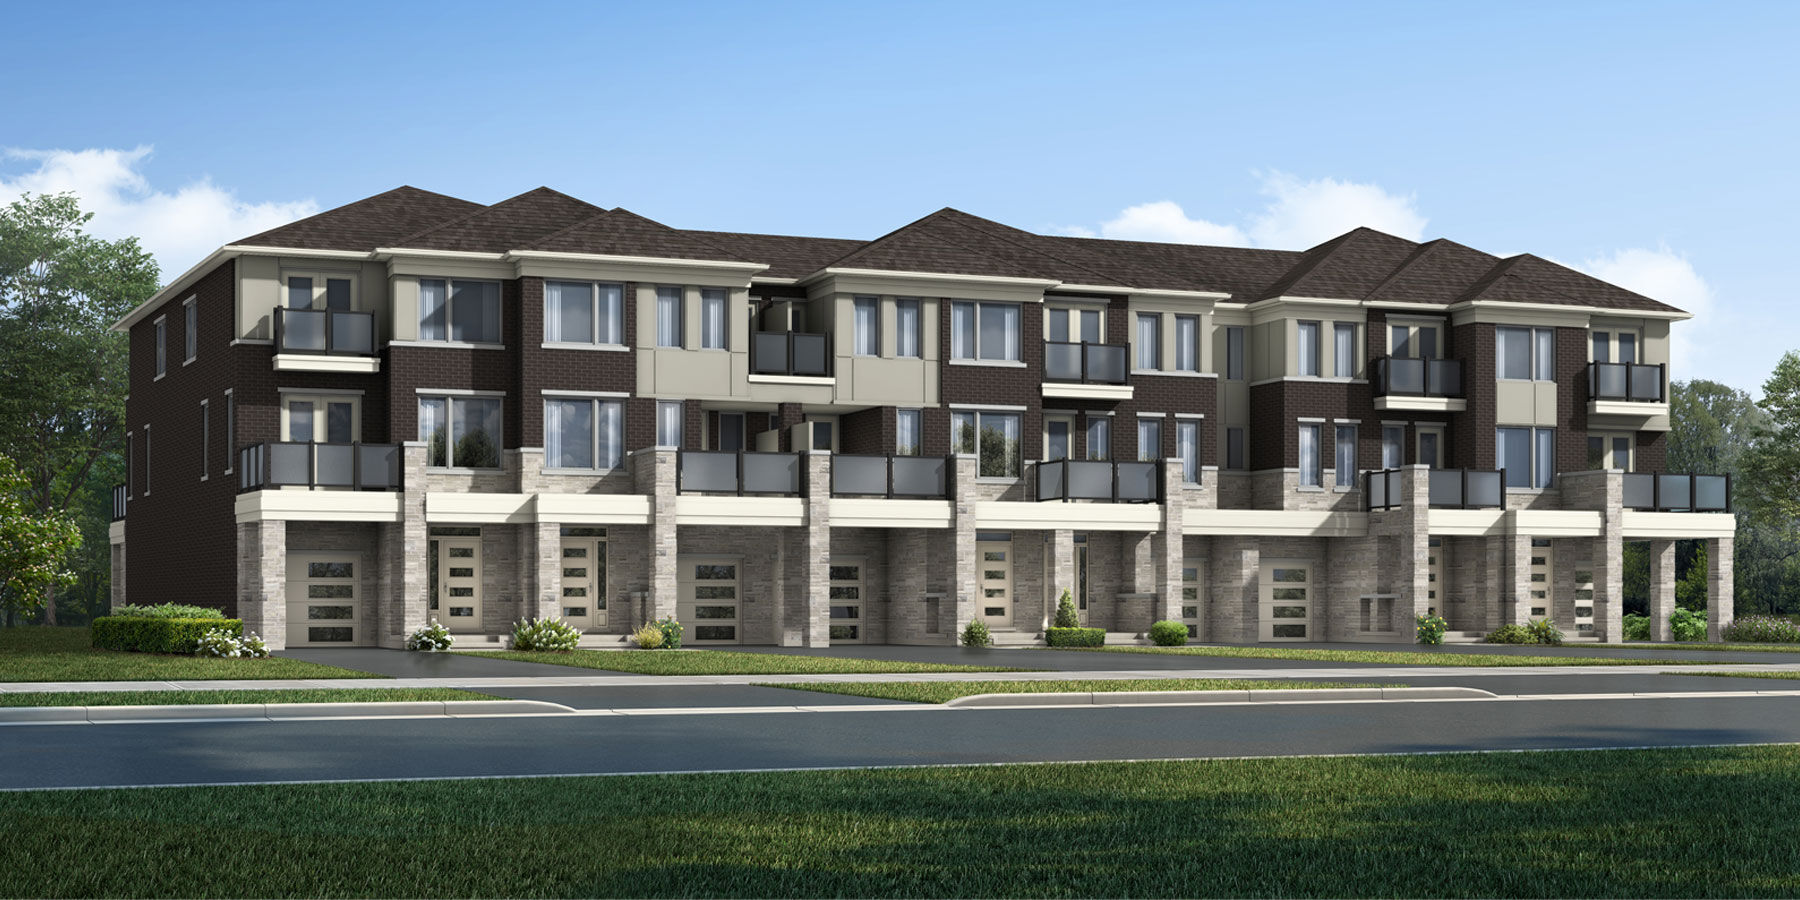 Vicinity by Mattamy Homes Canada